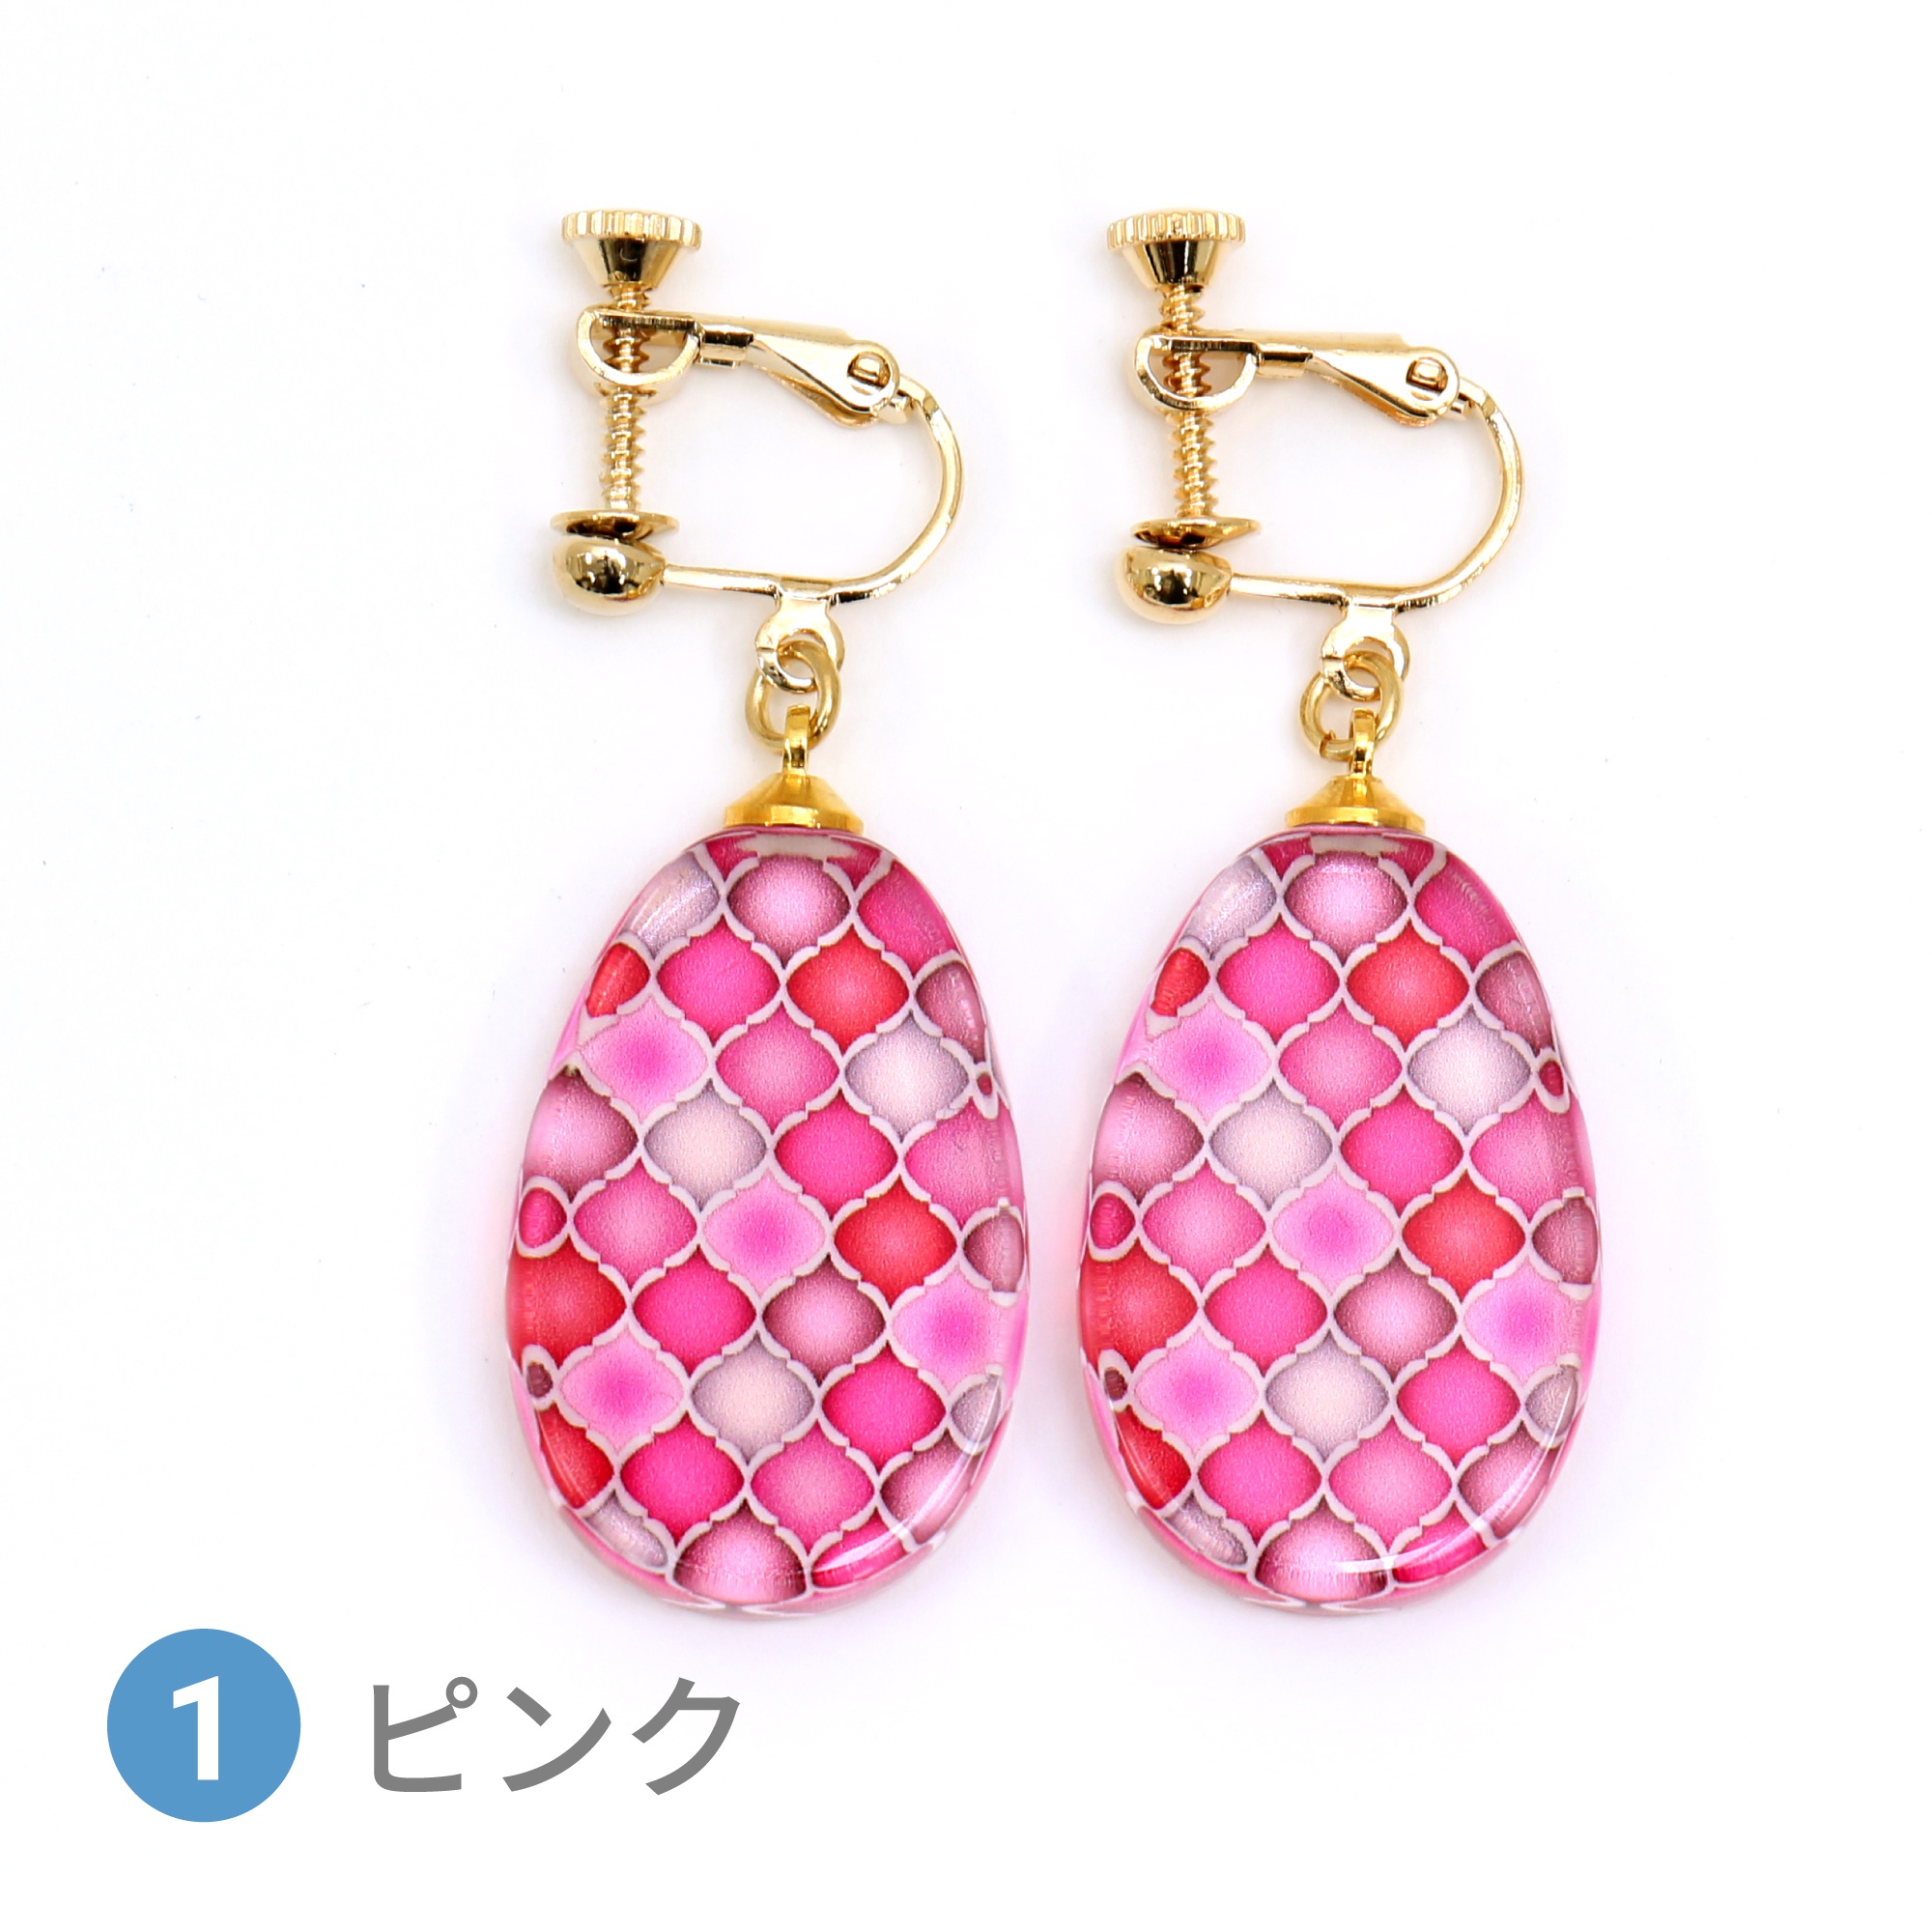 Glass accessories Earring MOROCCAN pink drop shape